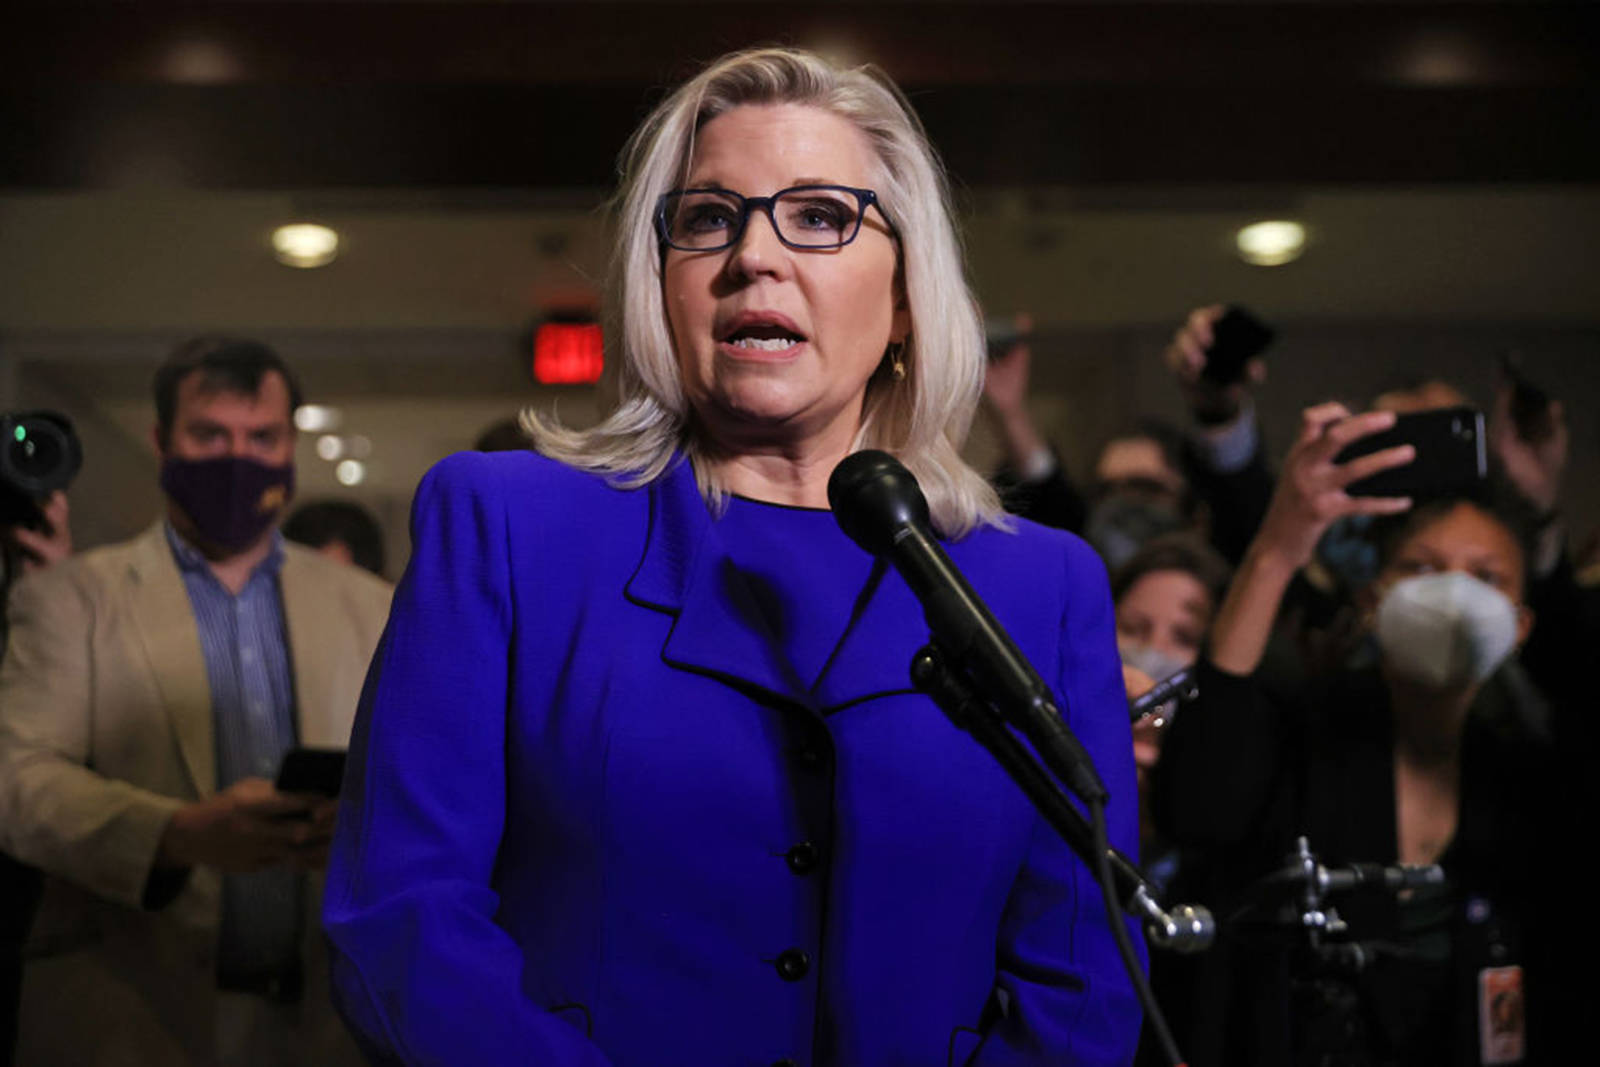 Photo by Chip Somodevilla/Getty Images 
Rep. Liz Cheney, R-Wyoming, talks to reporters after House Republicans voted to remove her as conference chair in in Washington, D.C. GOP members removed Cheney from her leadership position after she became a target for former President Donald Trump and his followers in the House as she has continually expressed the need for the Republican Party to separate themselves from Trump over his role in the Jan. 6 attack on the Capitol.